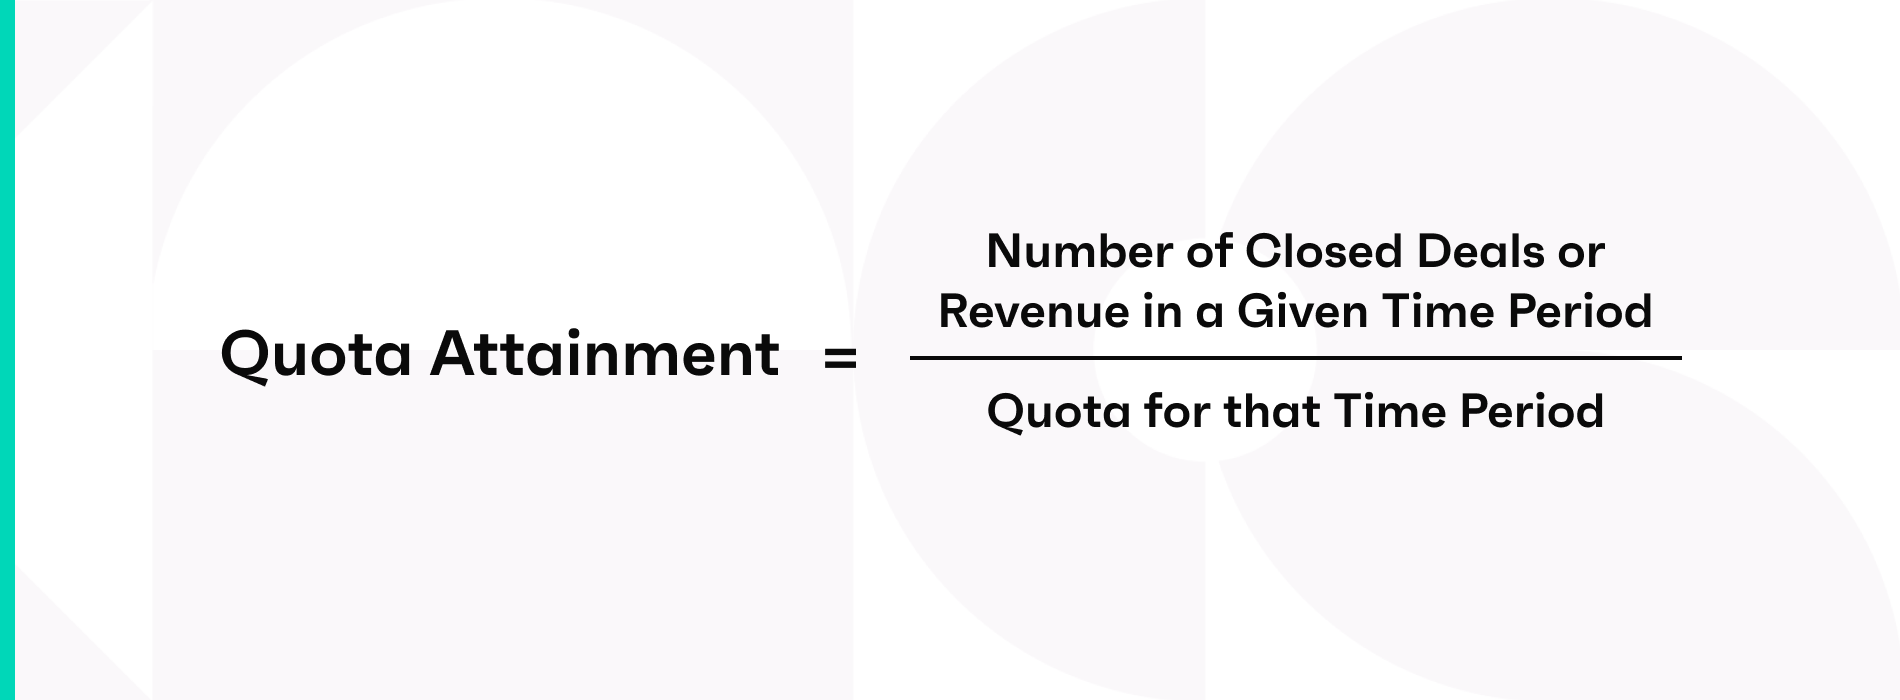 Quota attainment = (number of closed deals or revenue in a given time period) / (quota for that time period)